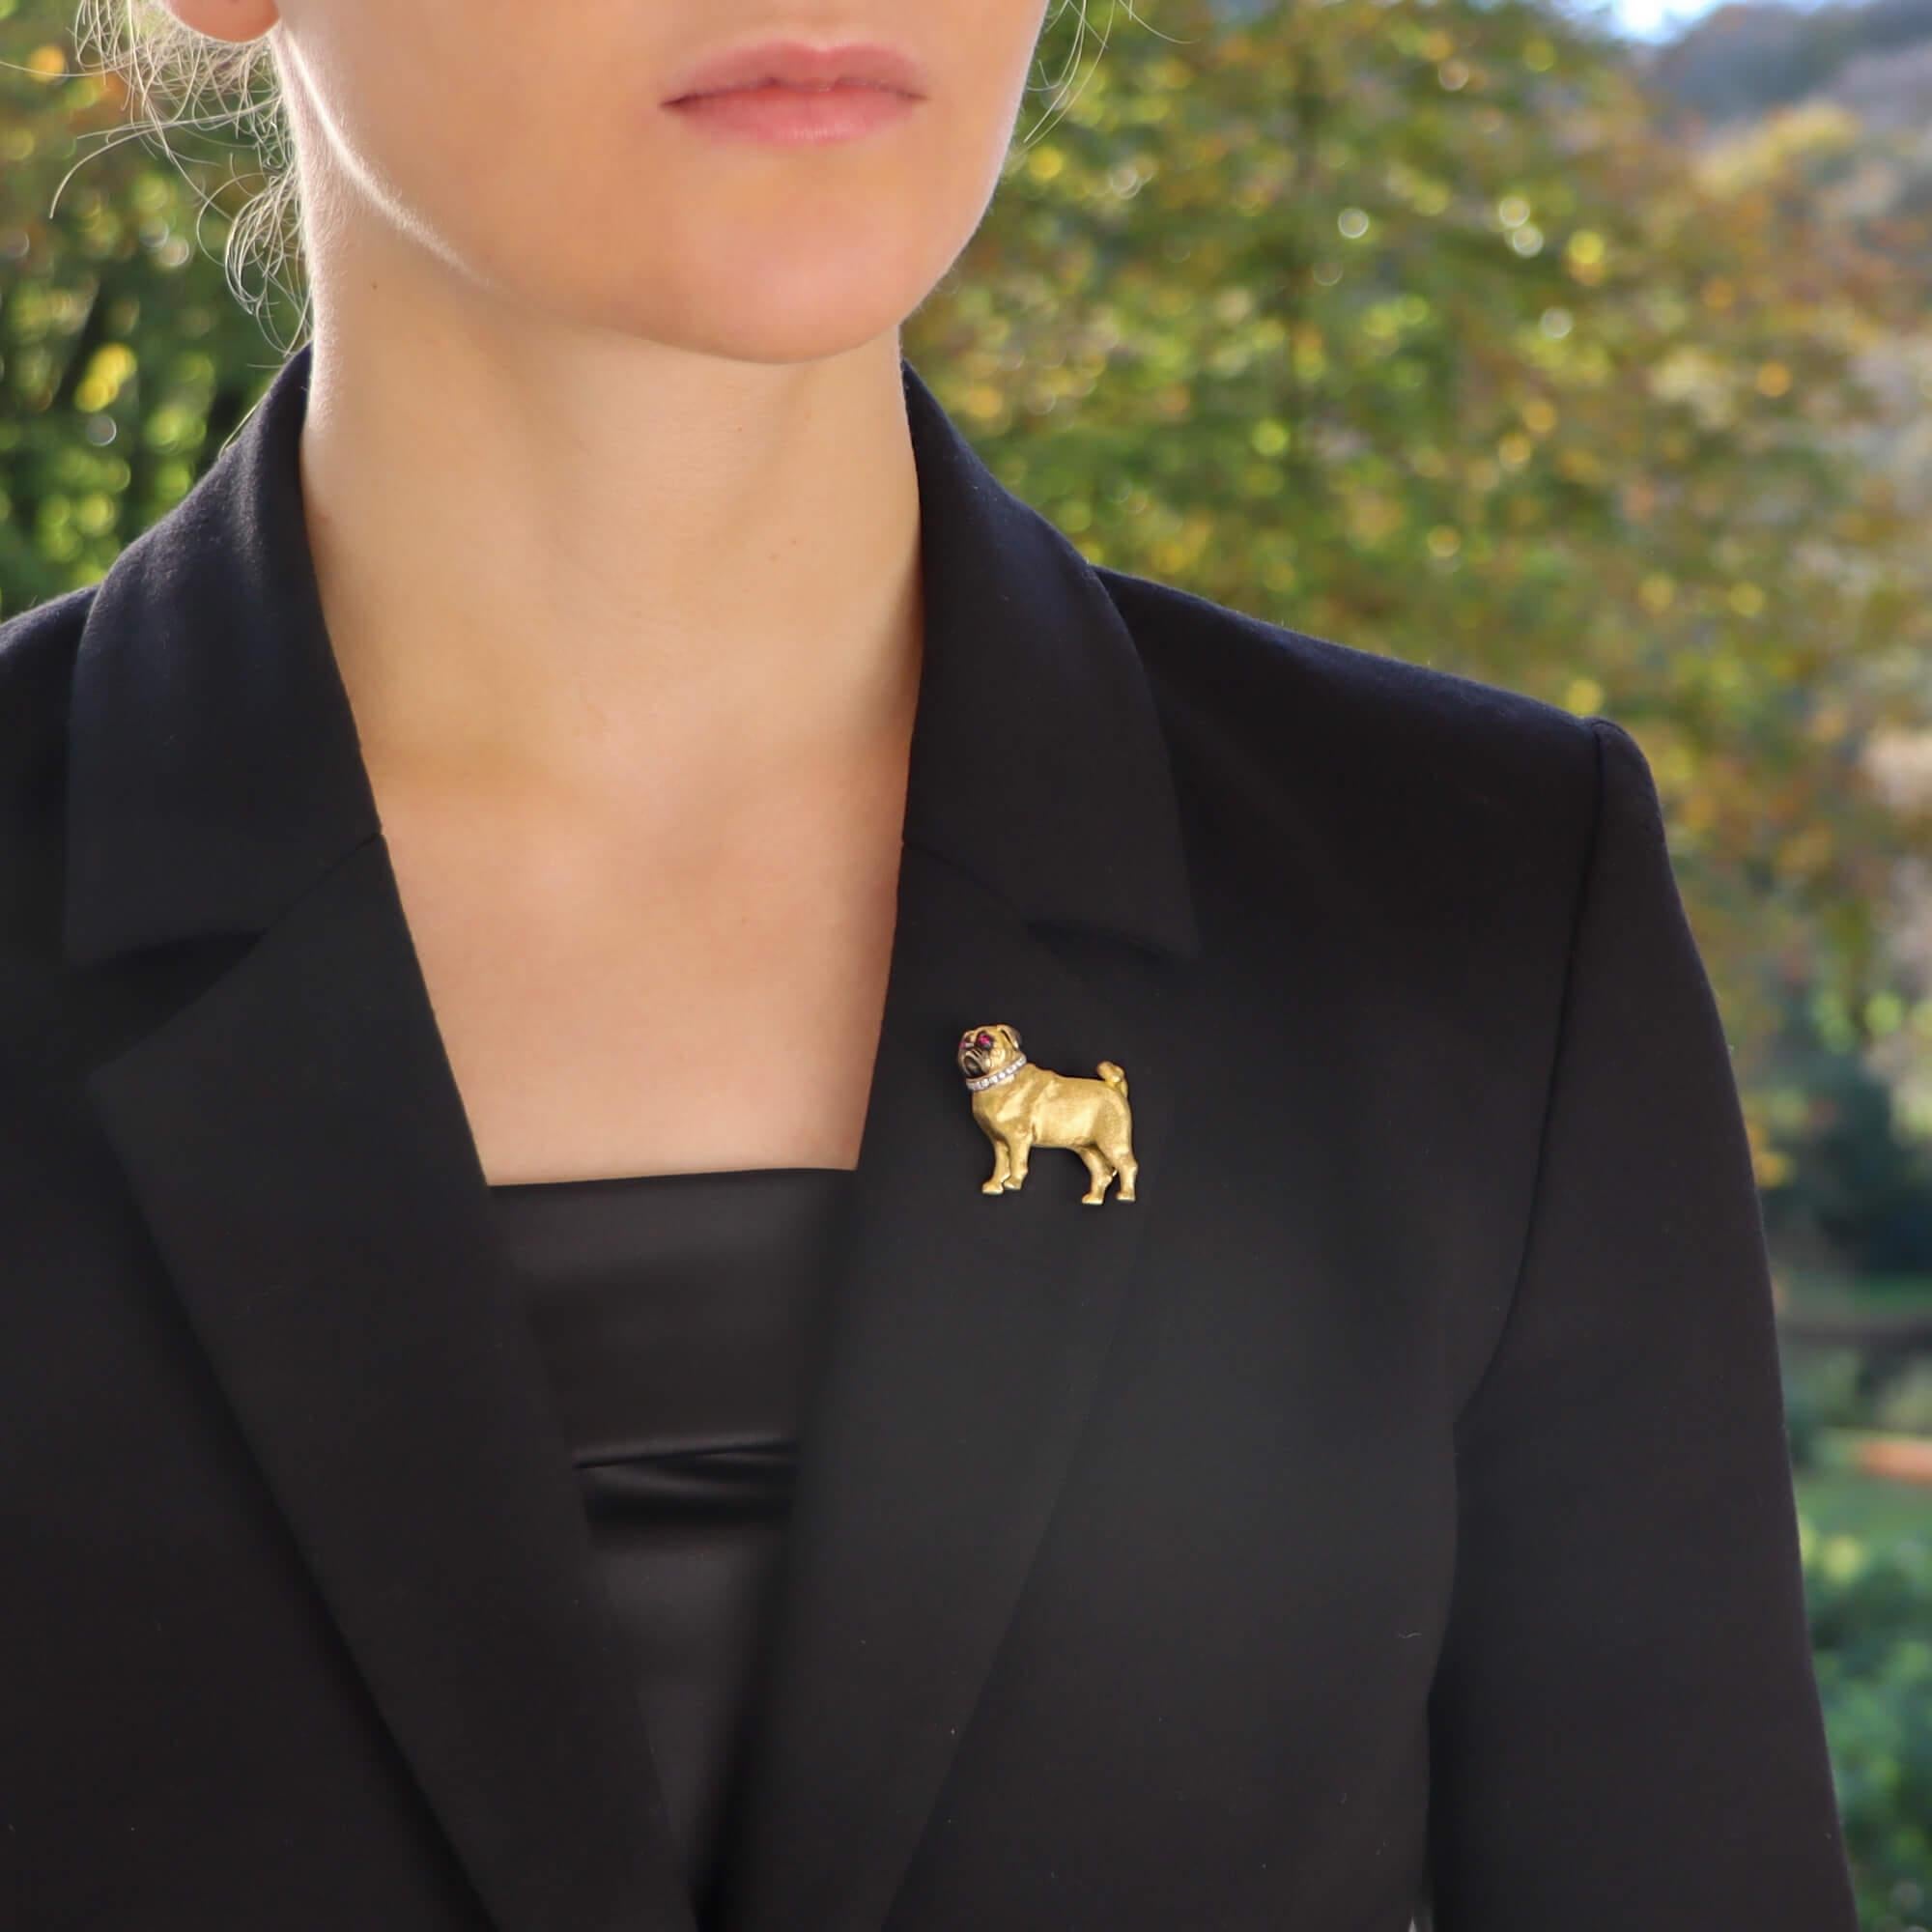 A beautiful ruby eyed Pug dog brooch set in 18k yellow gold.

The brooch depicts a standing Pug; which is set with two vibrant round cabochon ruby eyes. The Pug’s body has been handcrafted and beautifully detailed with brushed, engraved and rhodium